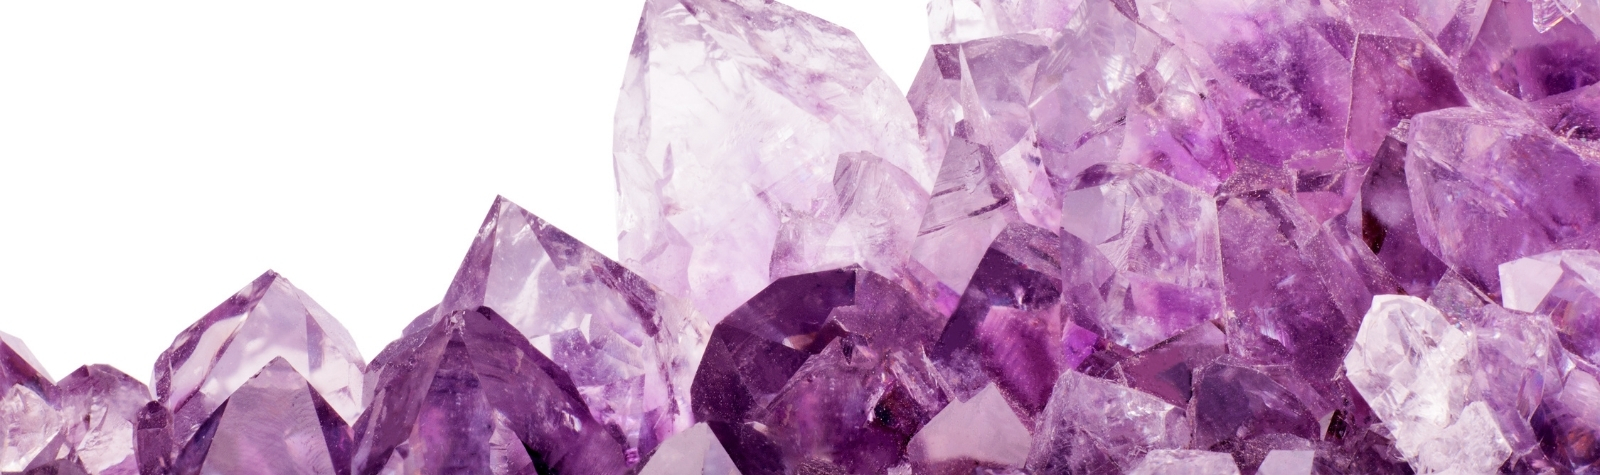 AMETHYST: FOR A SELF-CONFIDENT, SEDUCTIVE AND DARING WOMAN